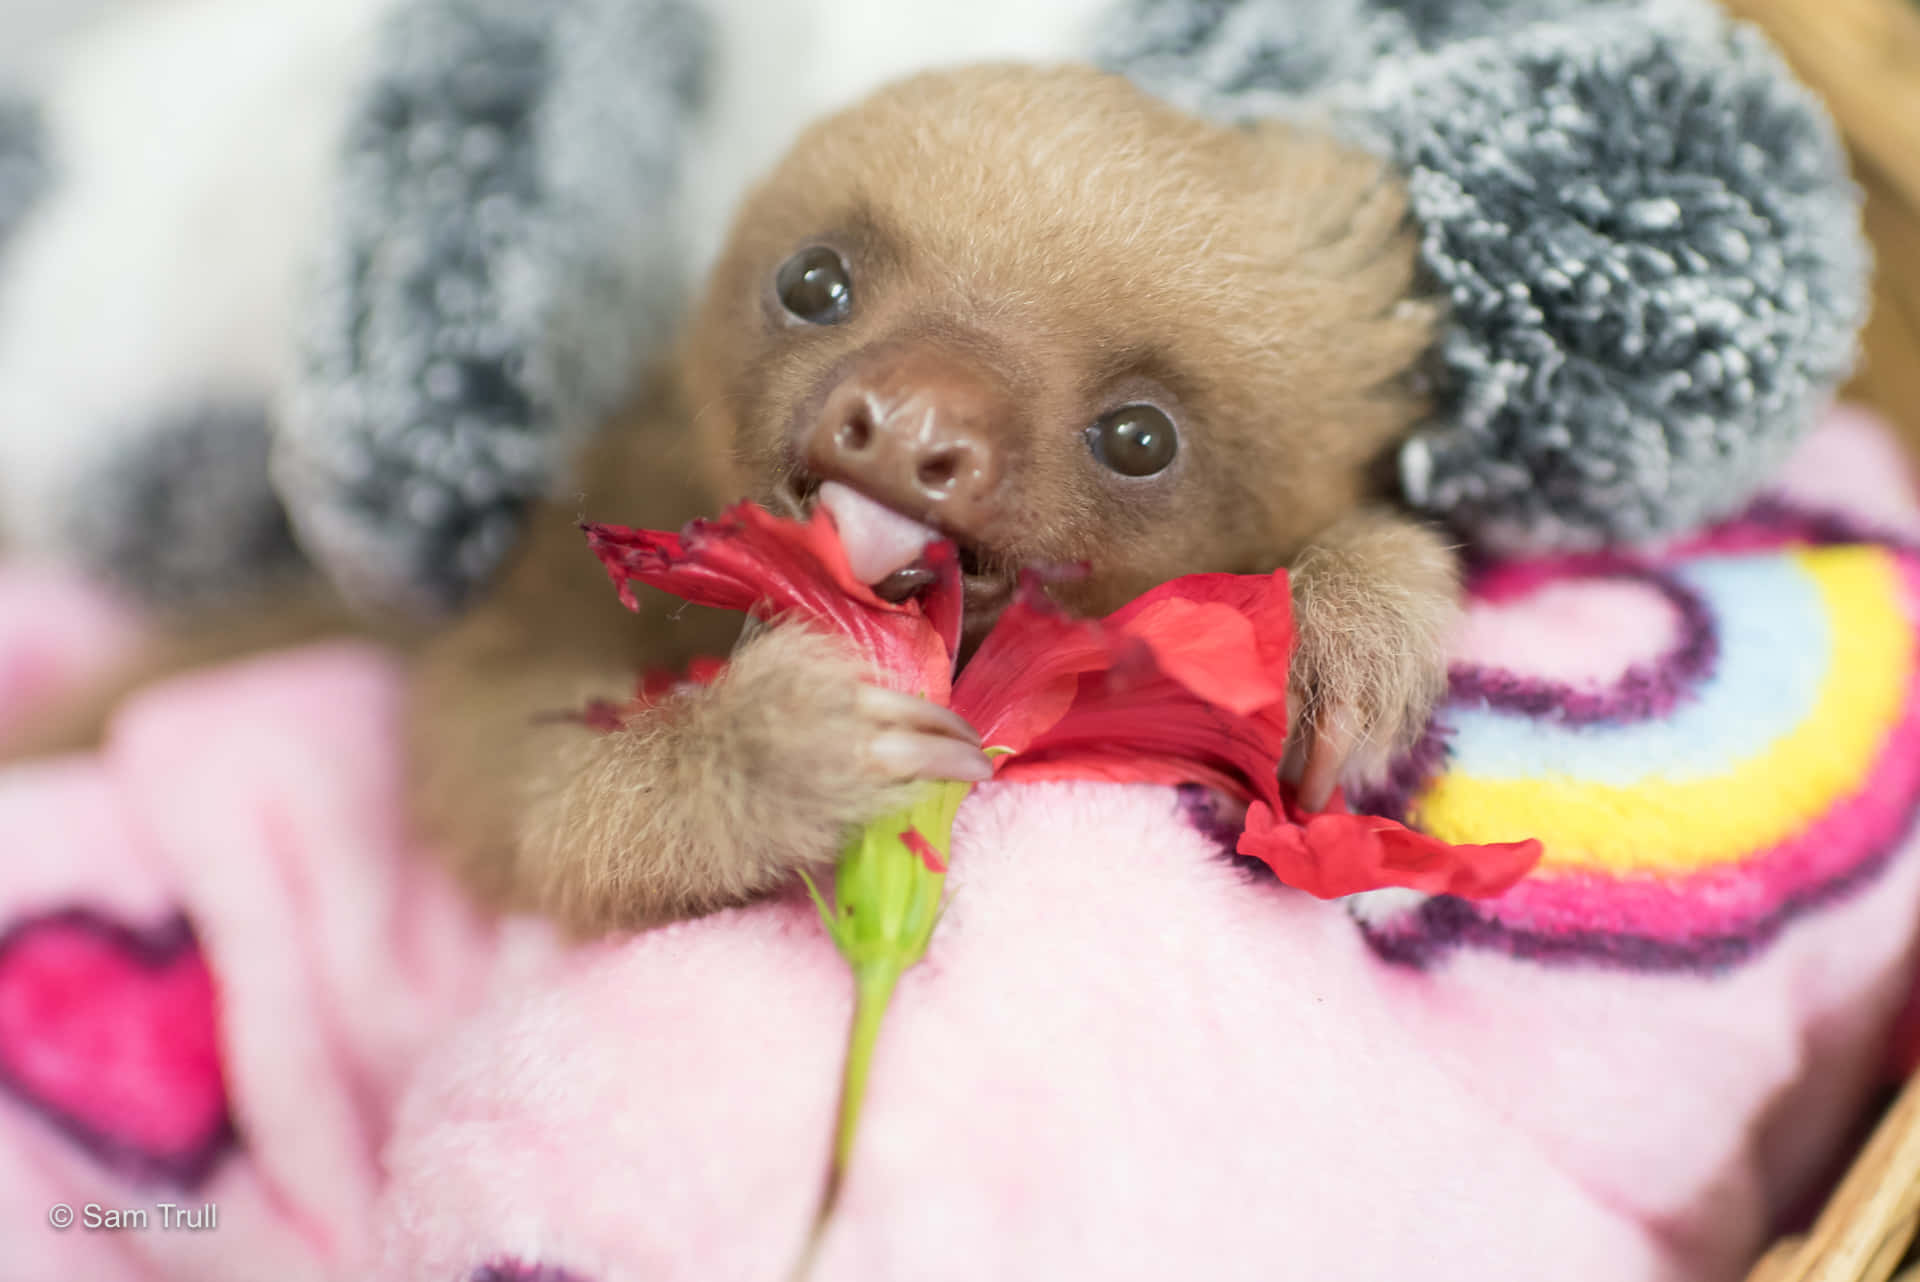 Cute Sloth Eating Flower Picture